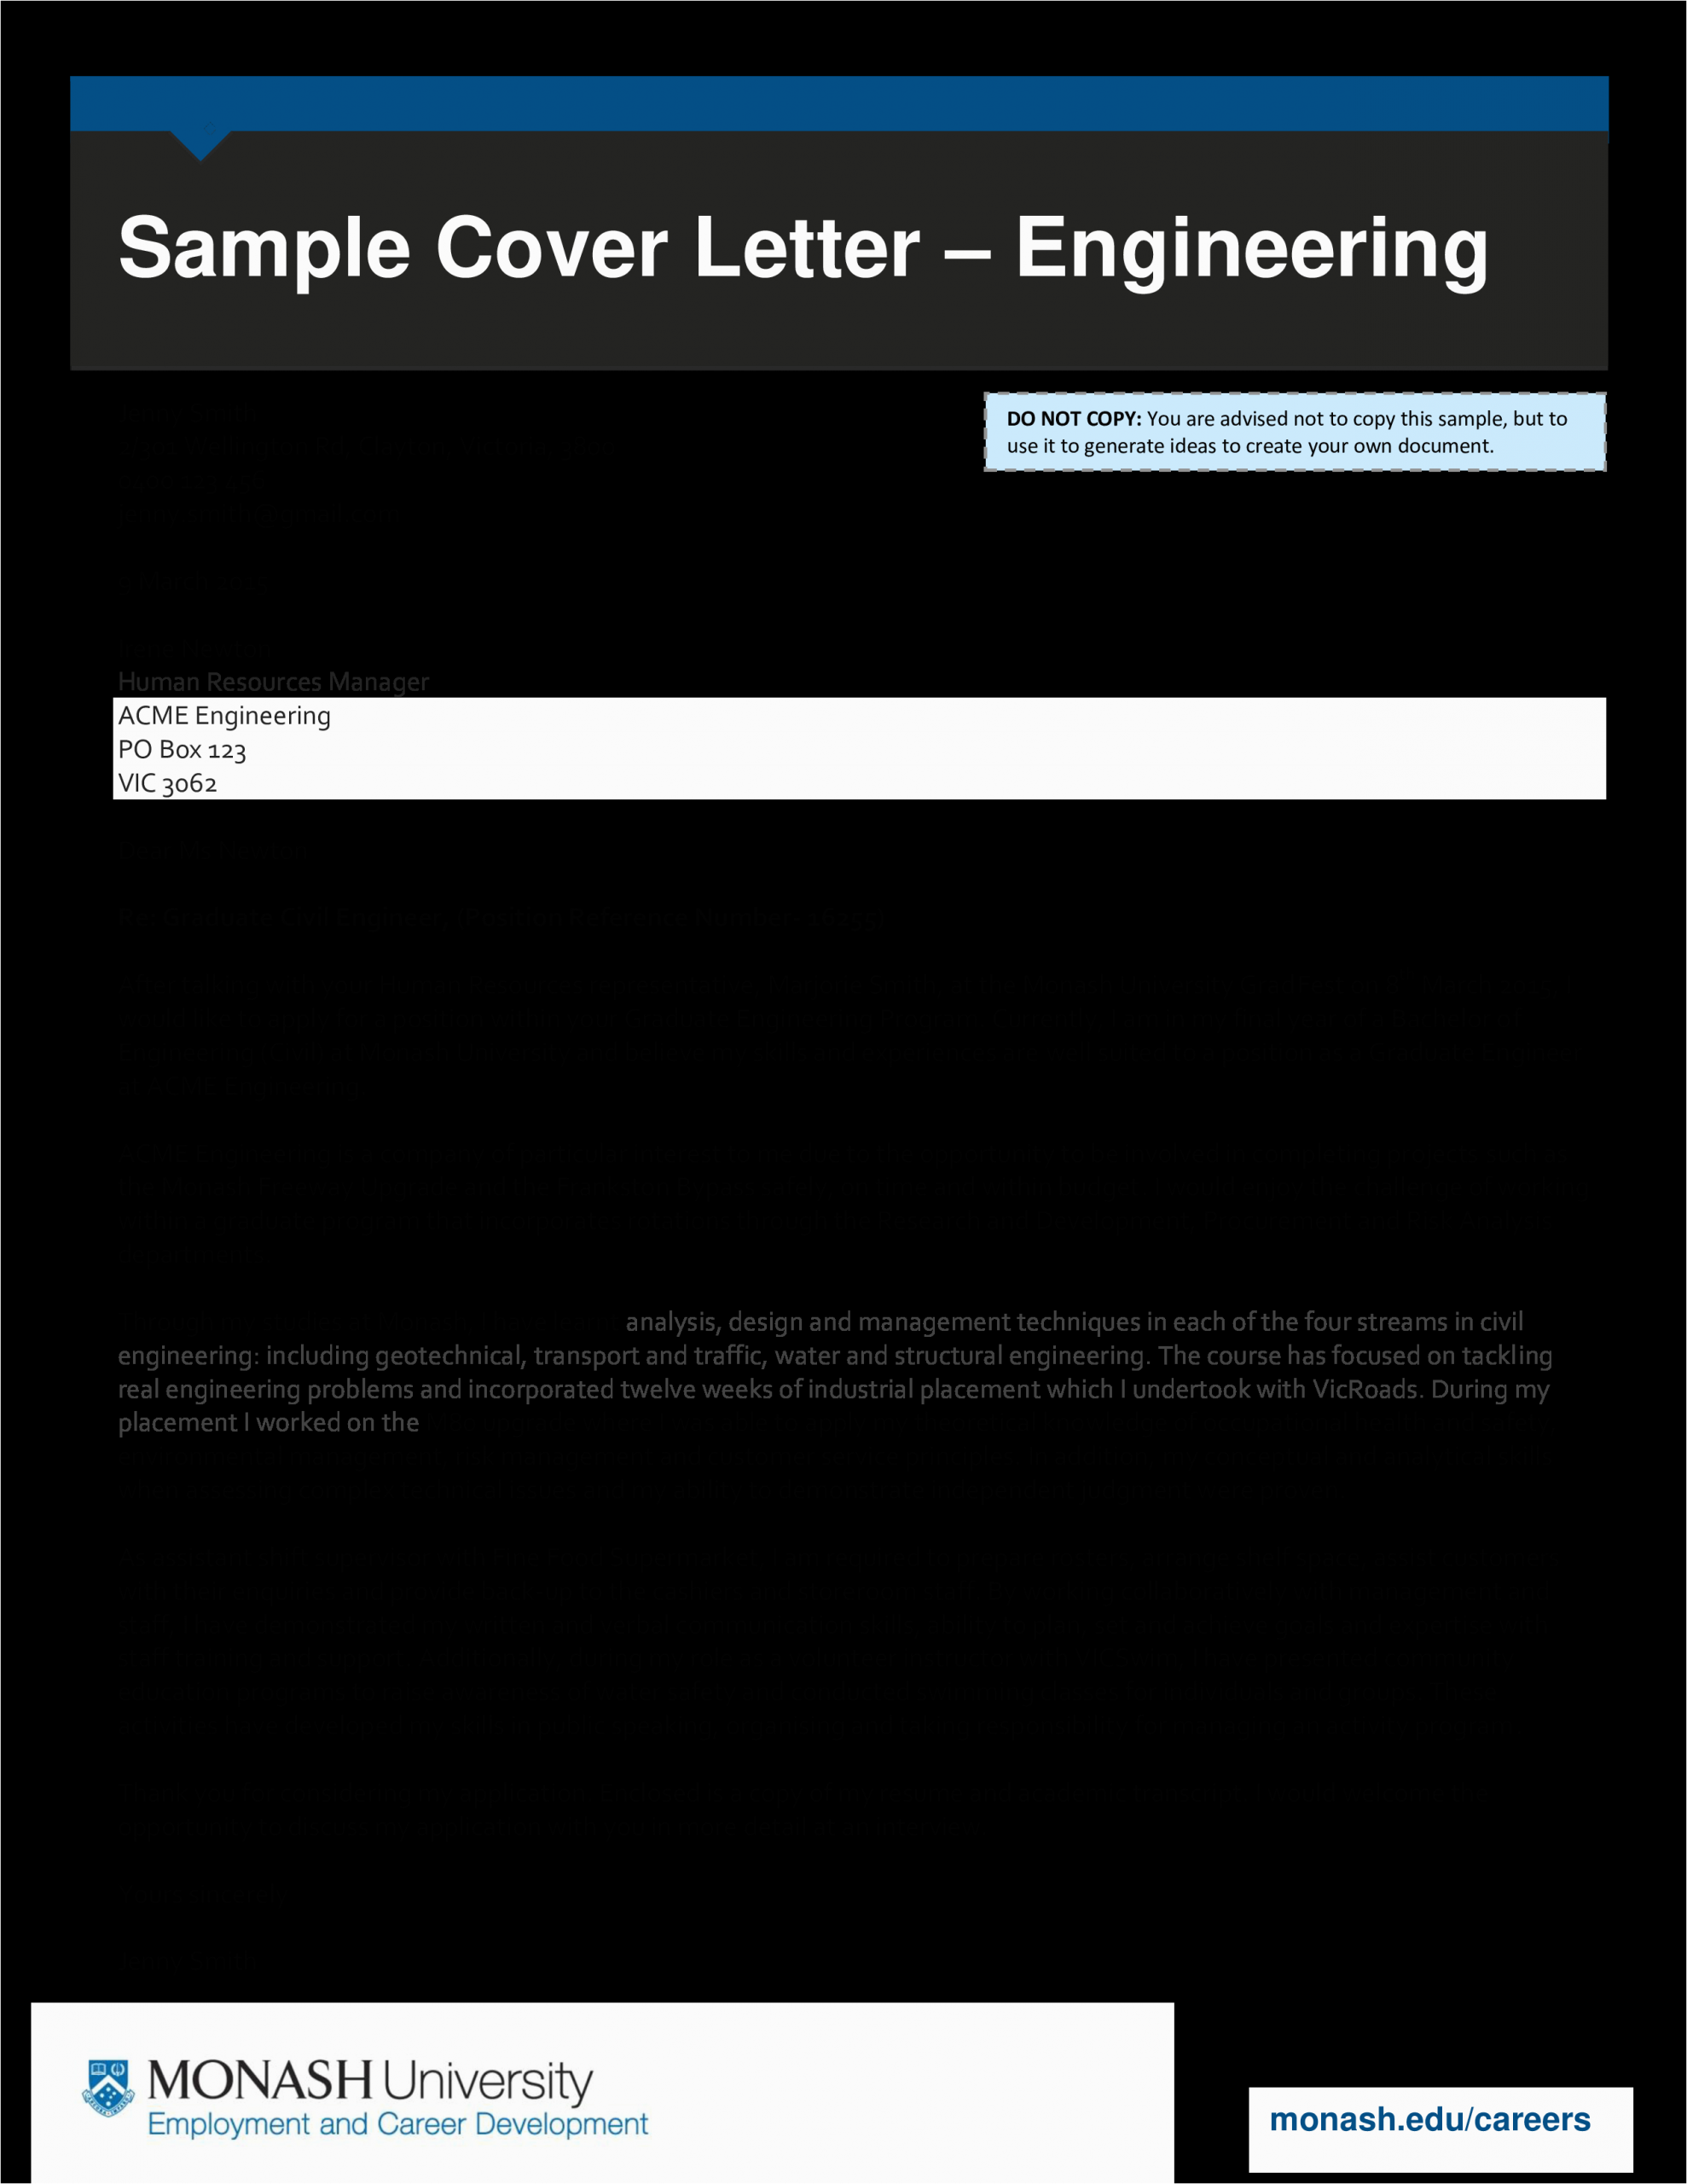 Resume and Cover Letter Template Download Engineering Resume Cover Letter Sample